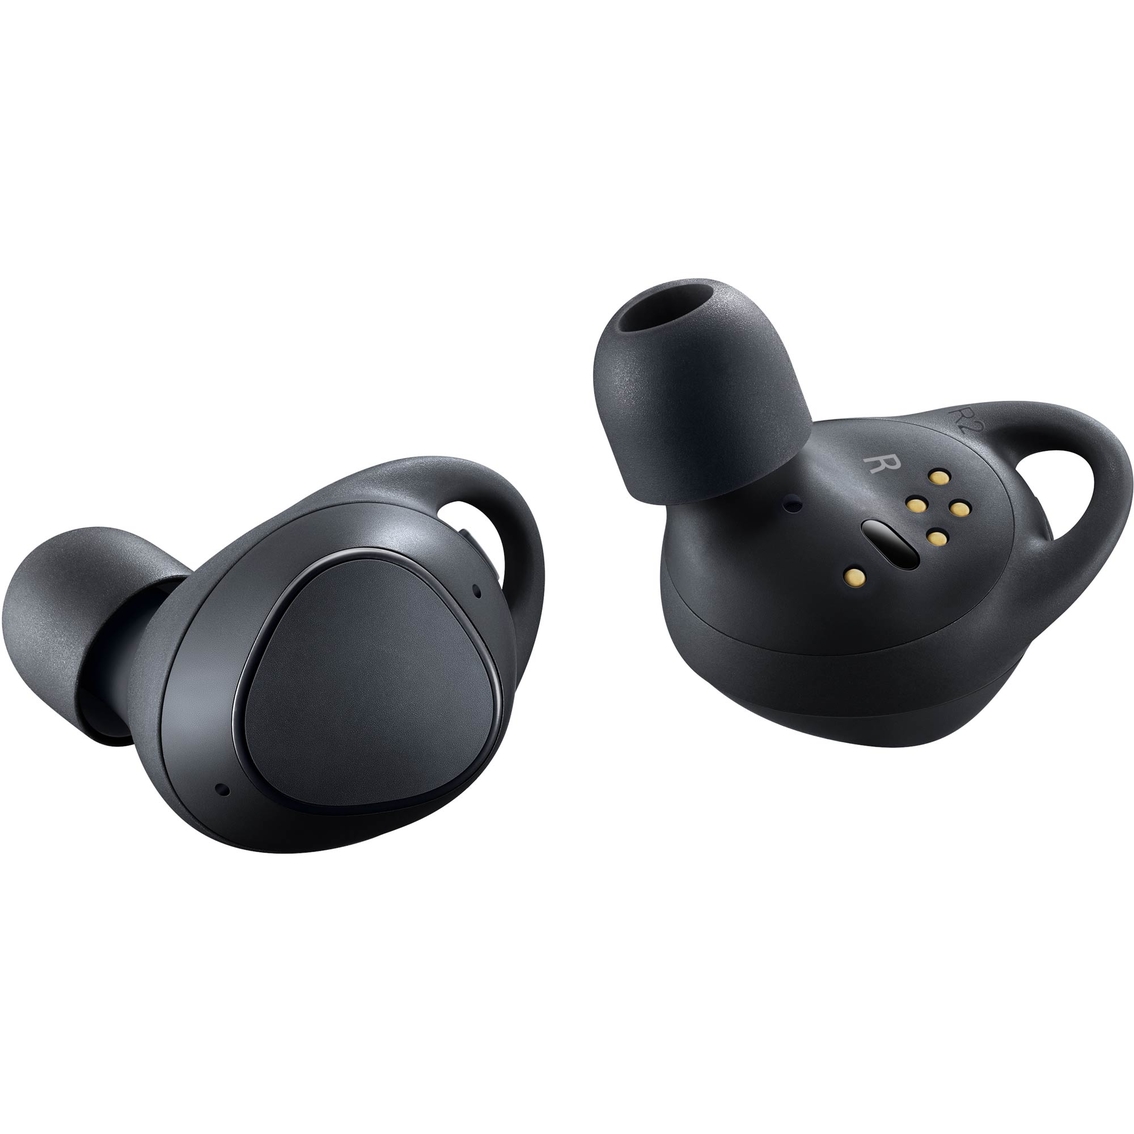 Samsung Gear IconX Wireless Earbuds 2018 Edition - Image 2 of 4